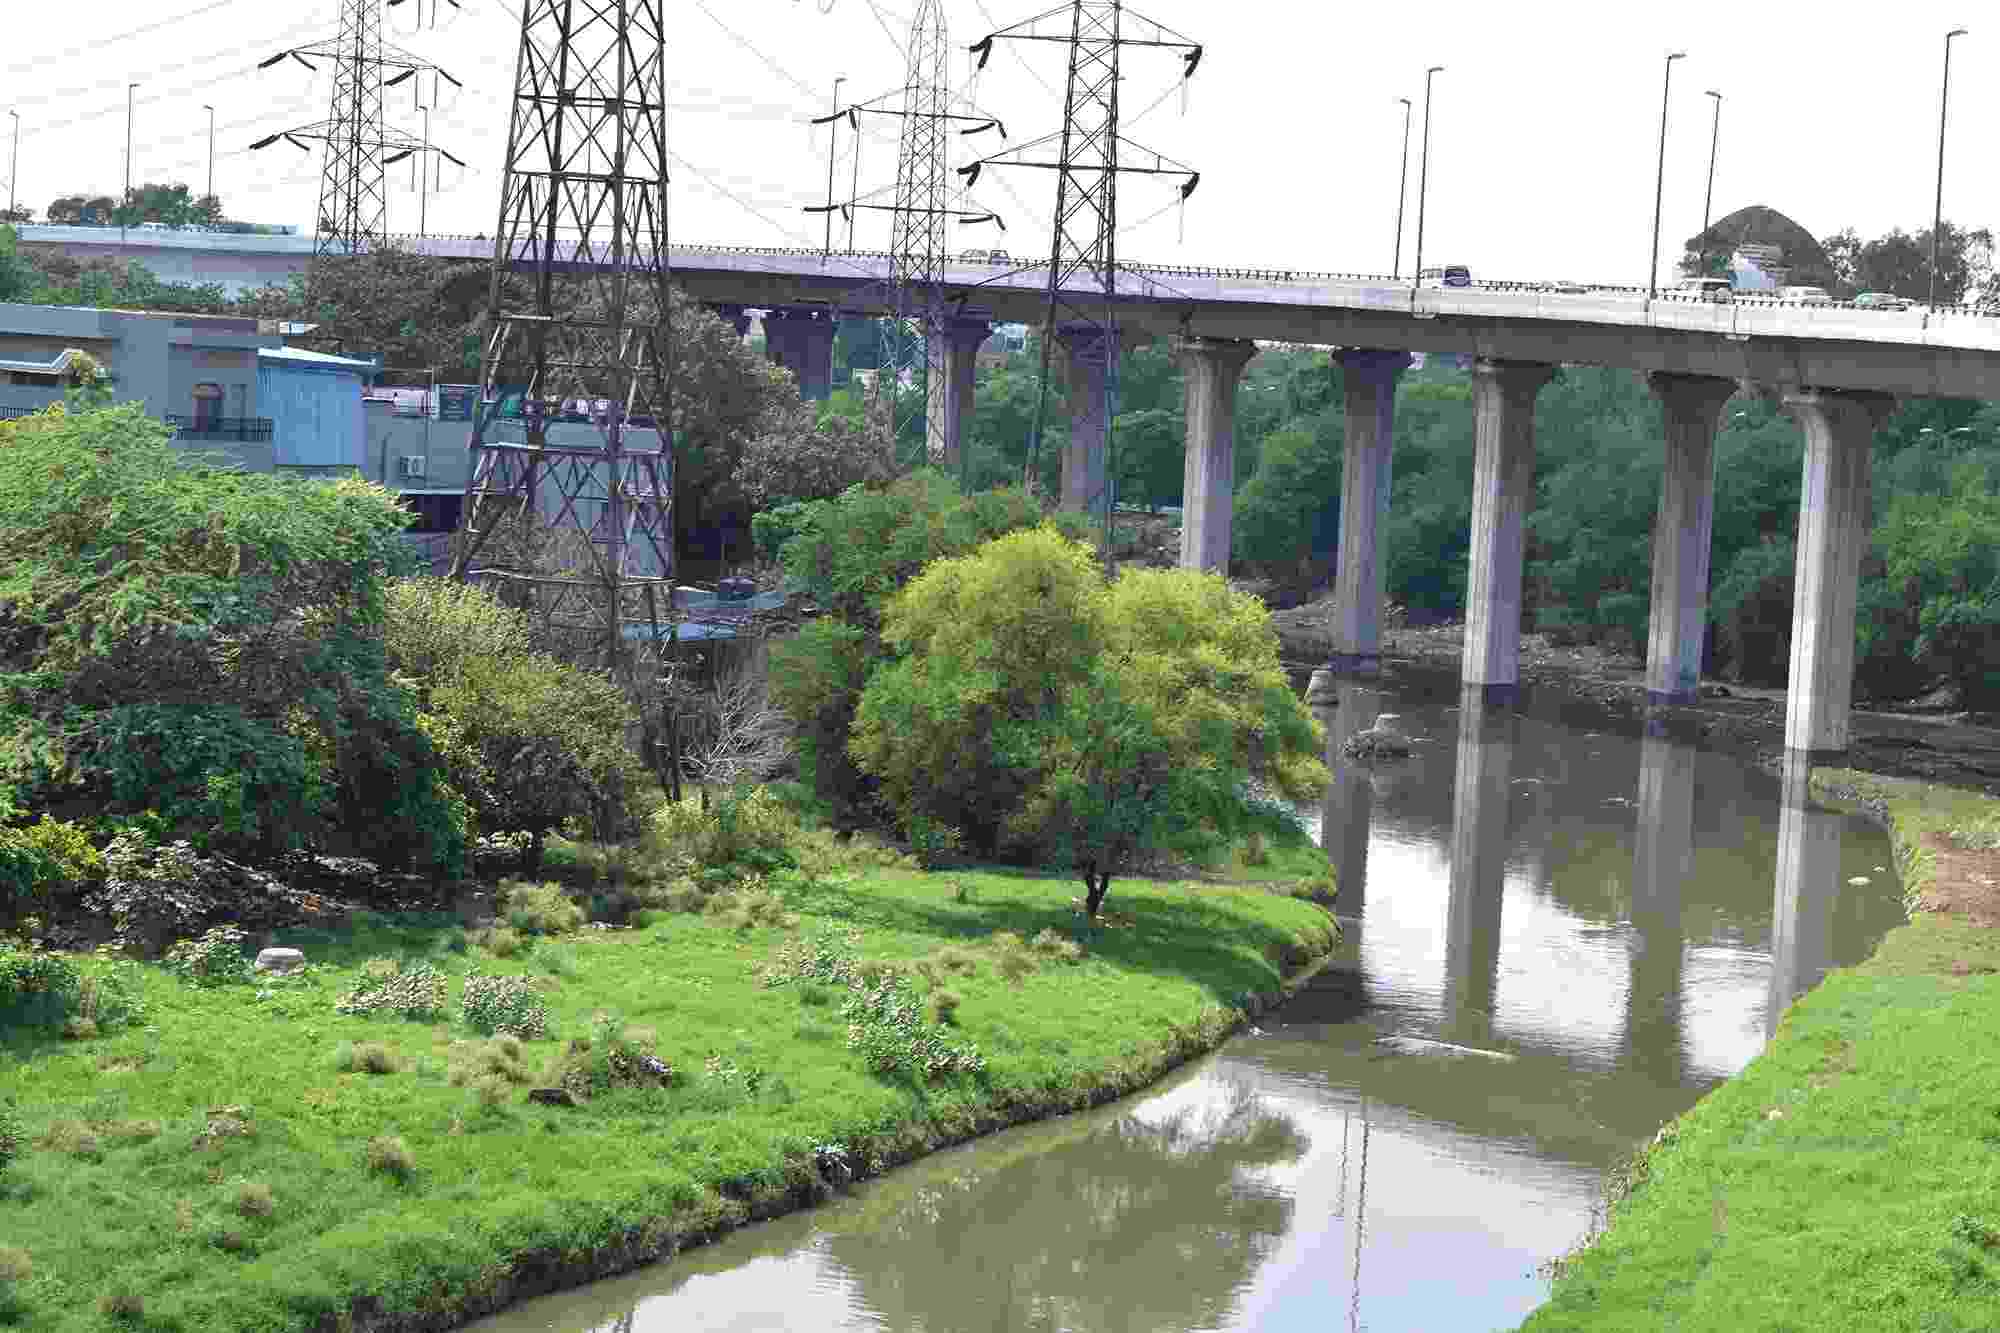 The Barapullah Drain is a key but polluted part of Delhi's drainage system, seen here with a large bridge crossing it and several electricity pylons located around it